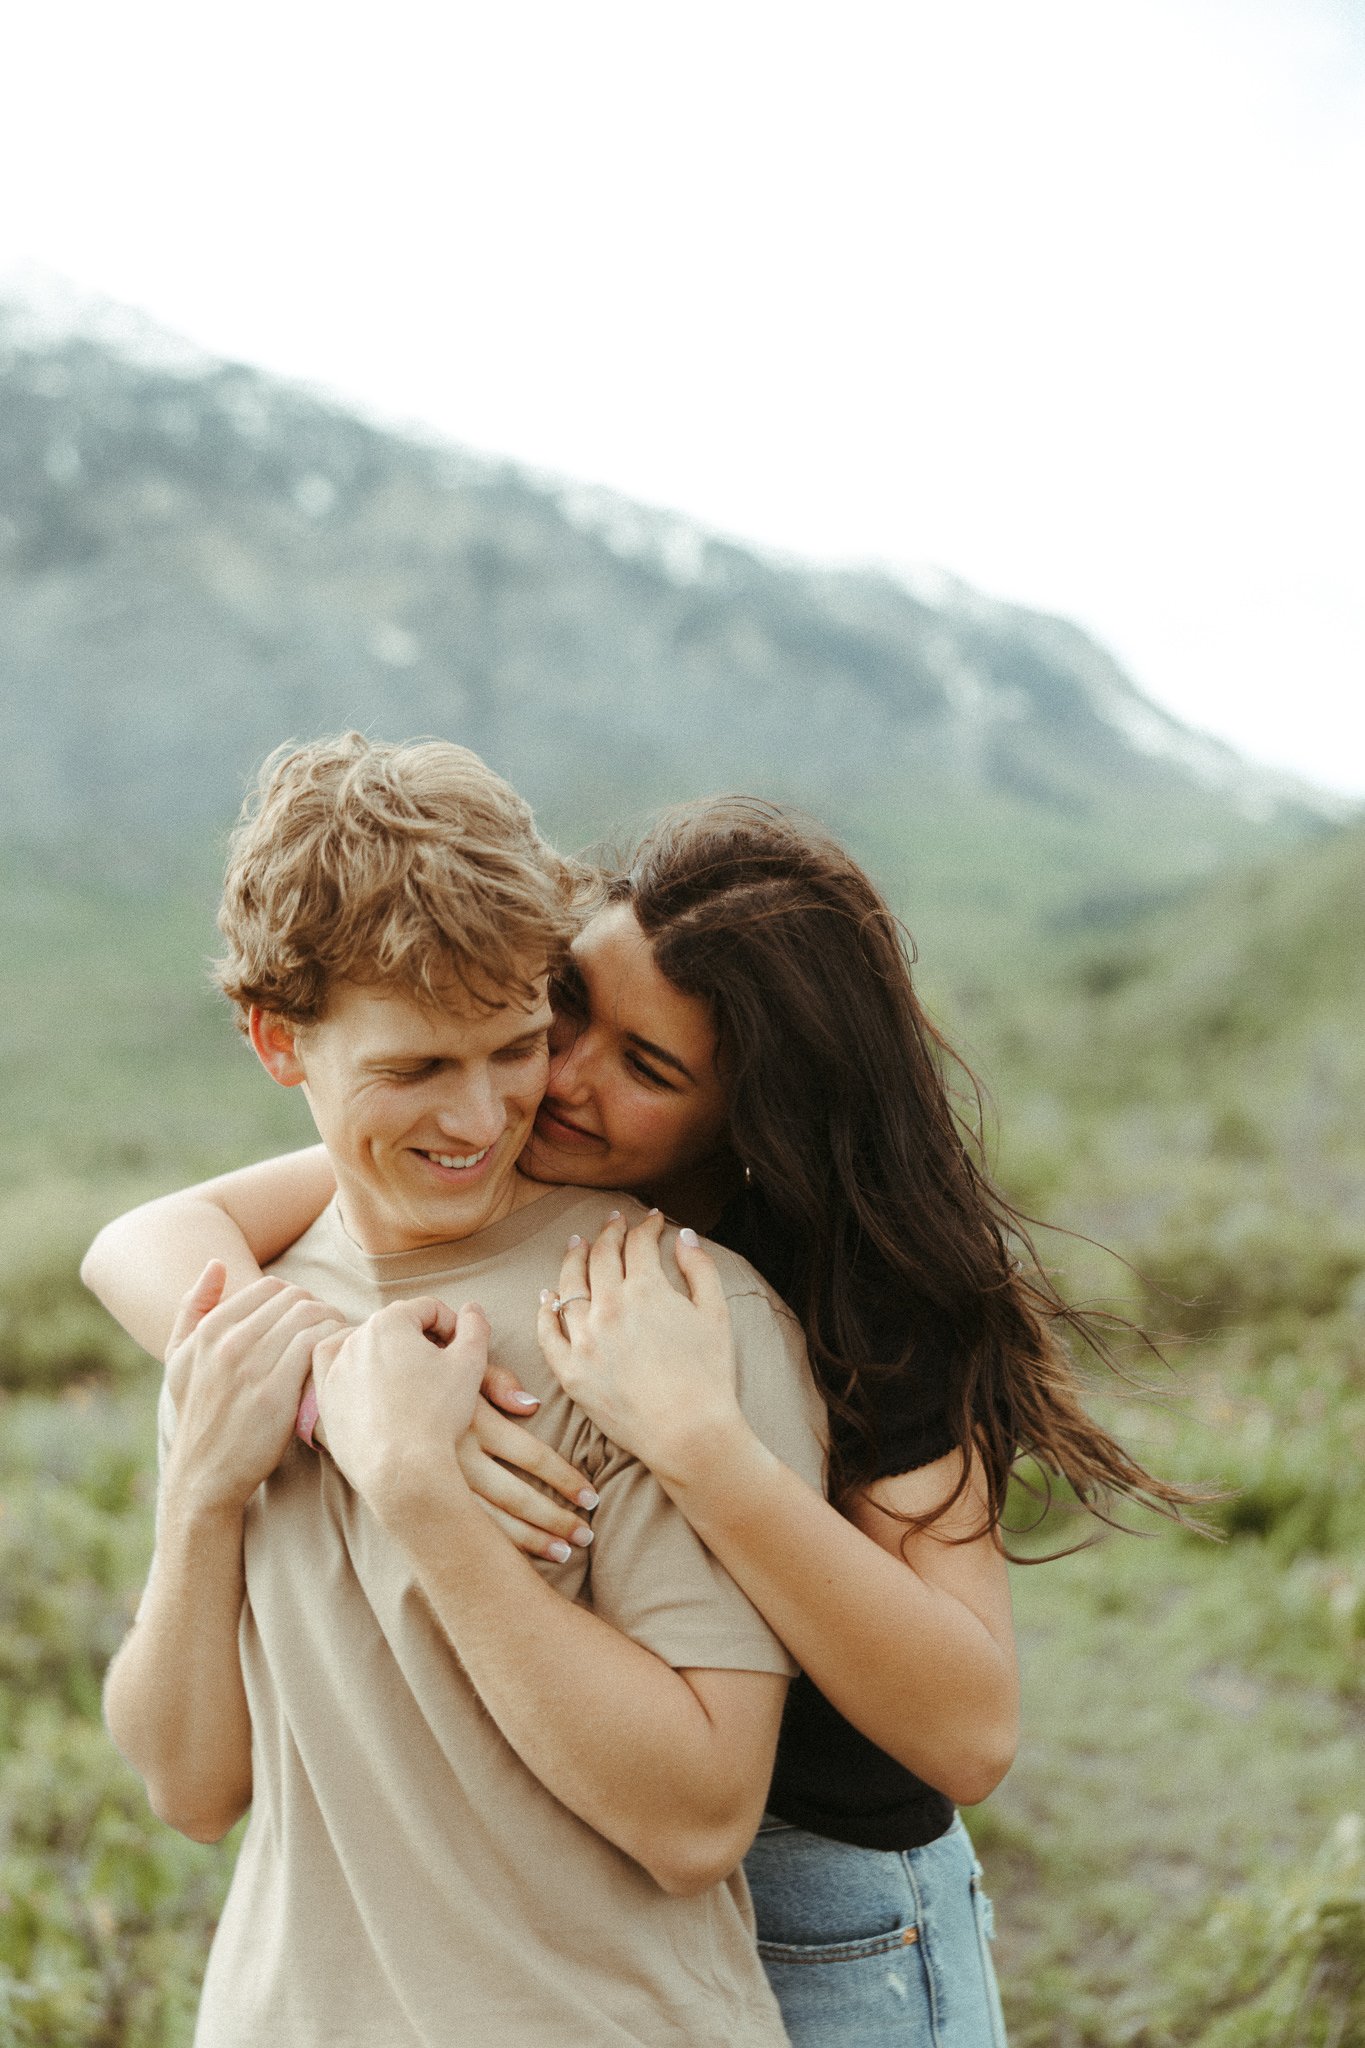 Spring-Provo-Canyon-Wildflowers-Engagement-Session-59